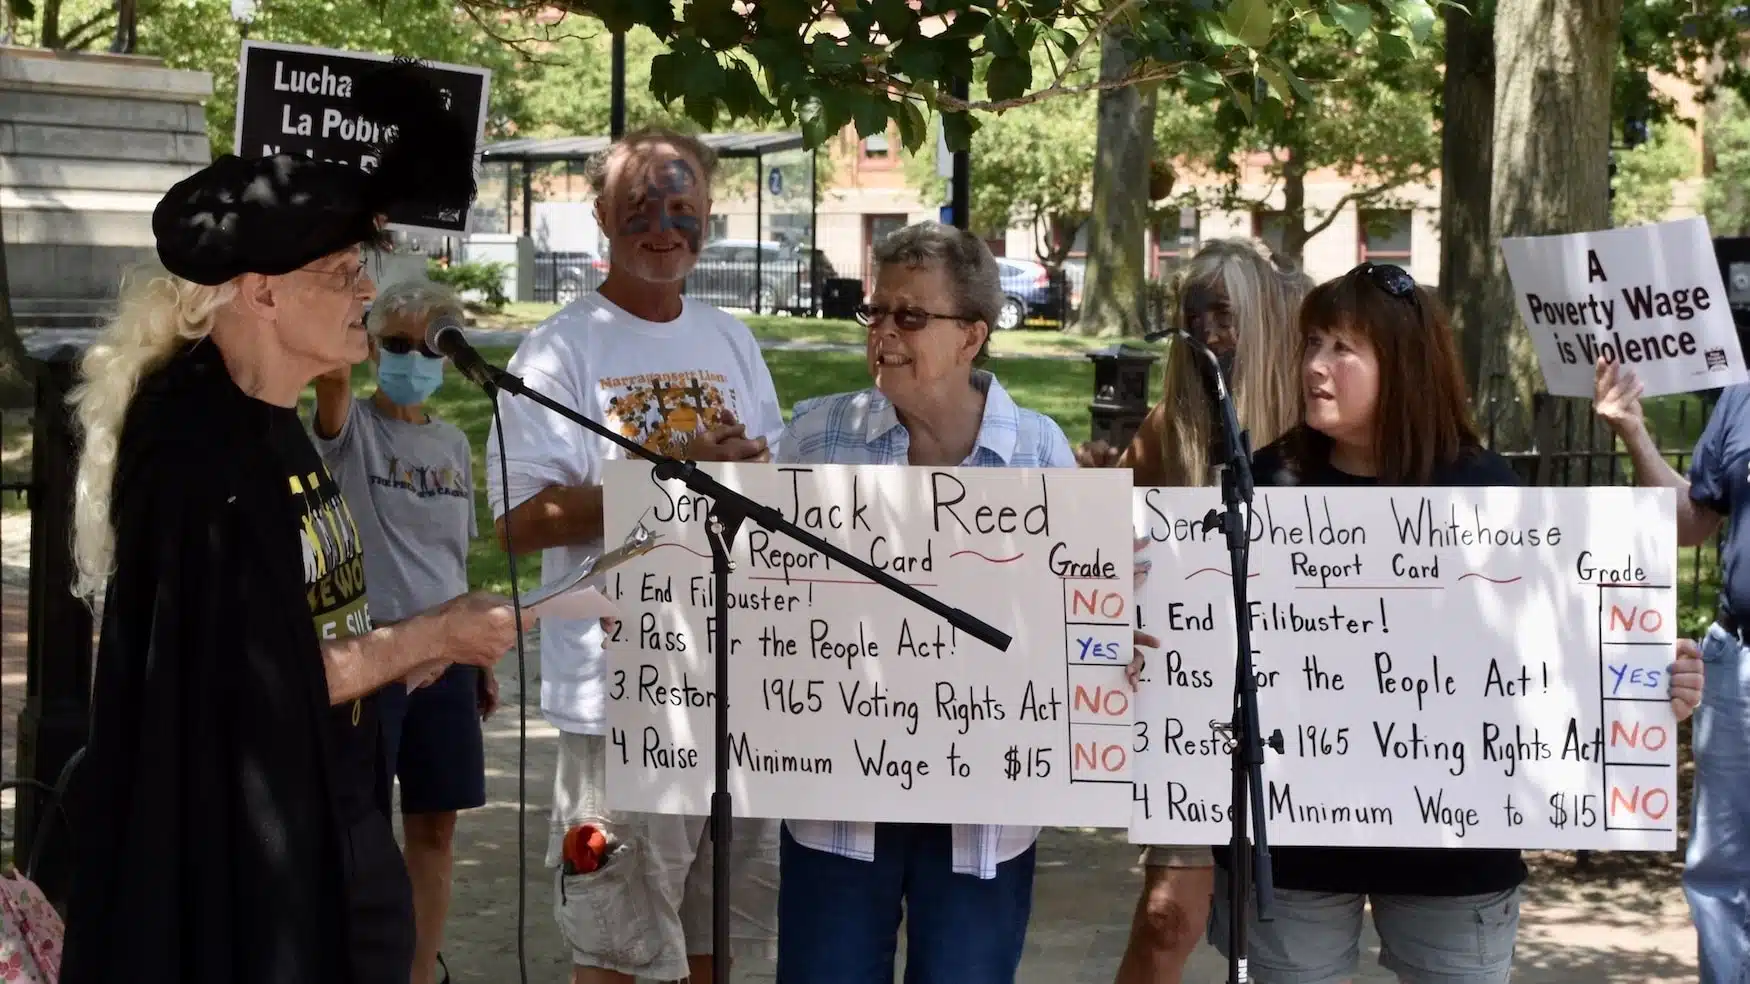 RI Poor People’s Campaign demands support from Senators Reed and Whitehouse